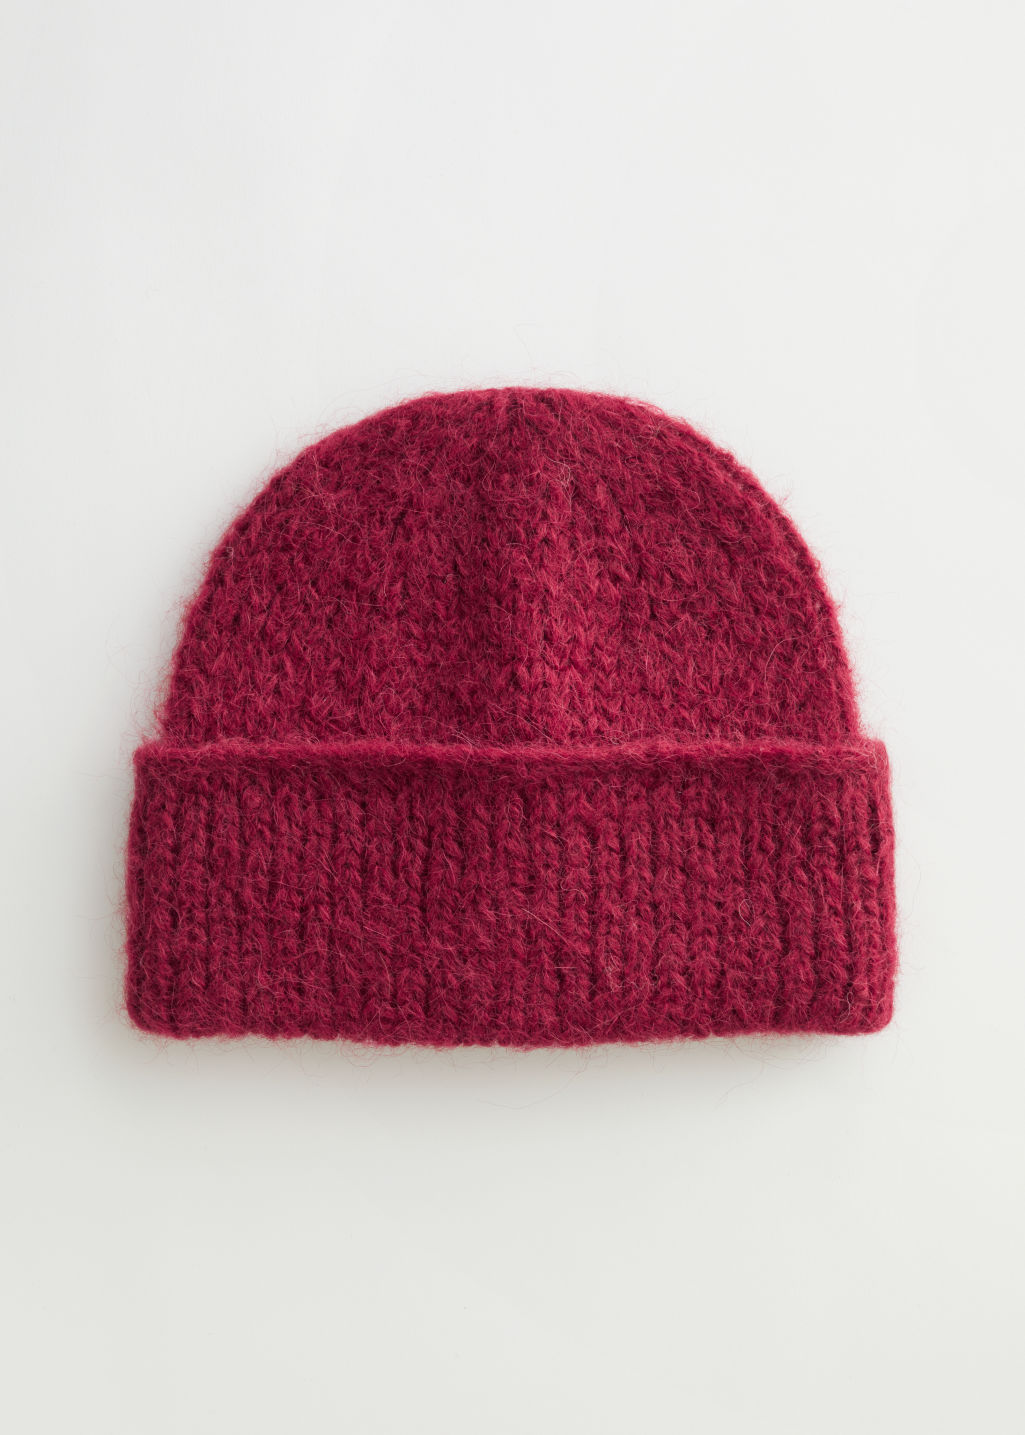 Fuzzy Wool Blend Knitted Beanie - Light Burgundy - Beanies - & Other Stories